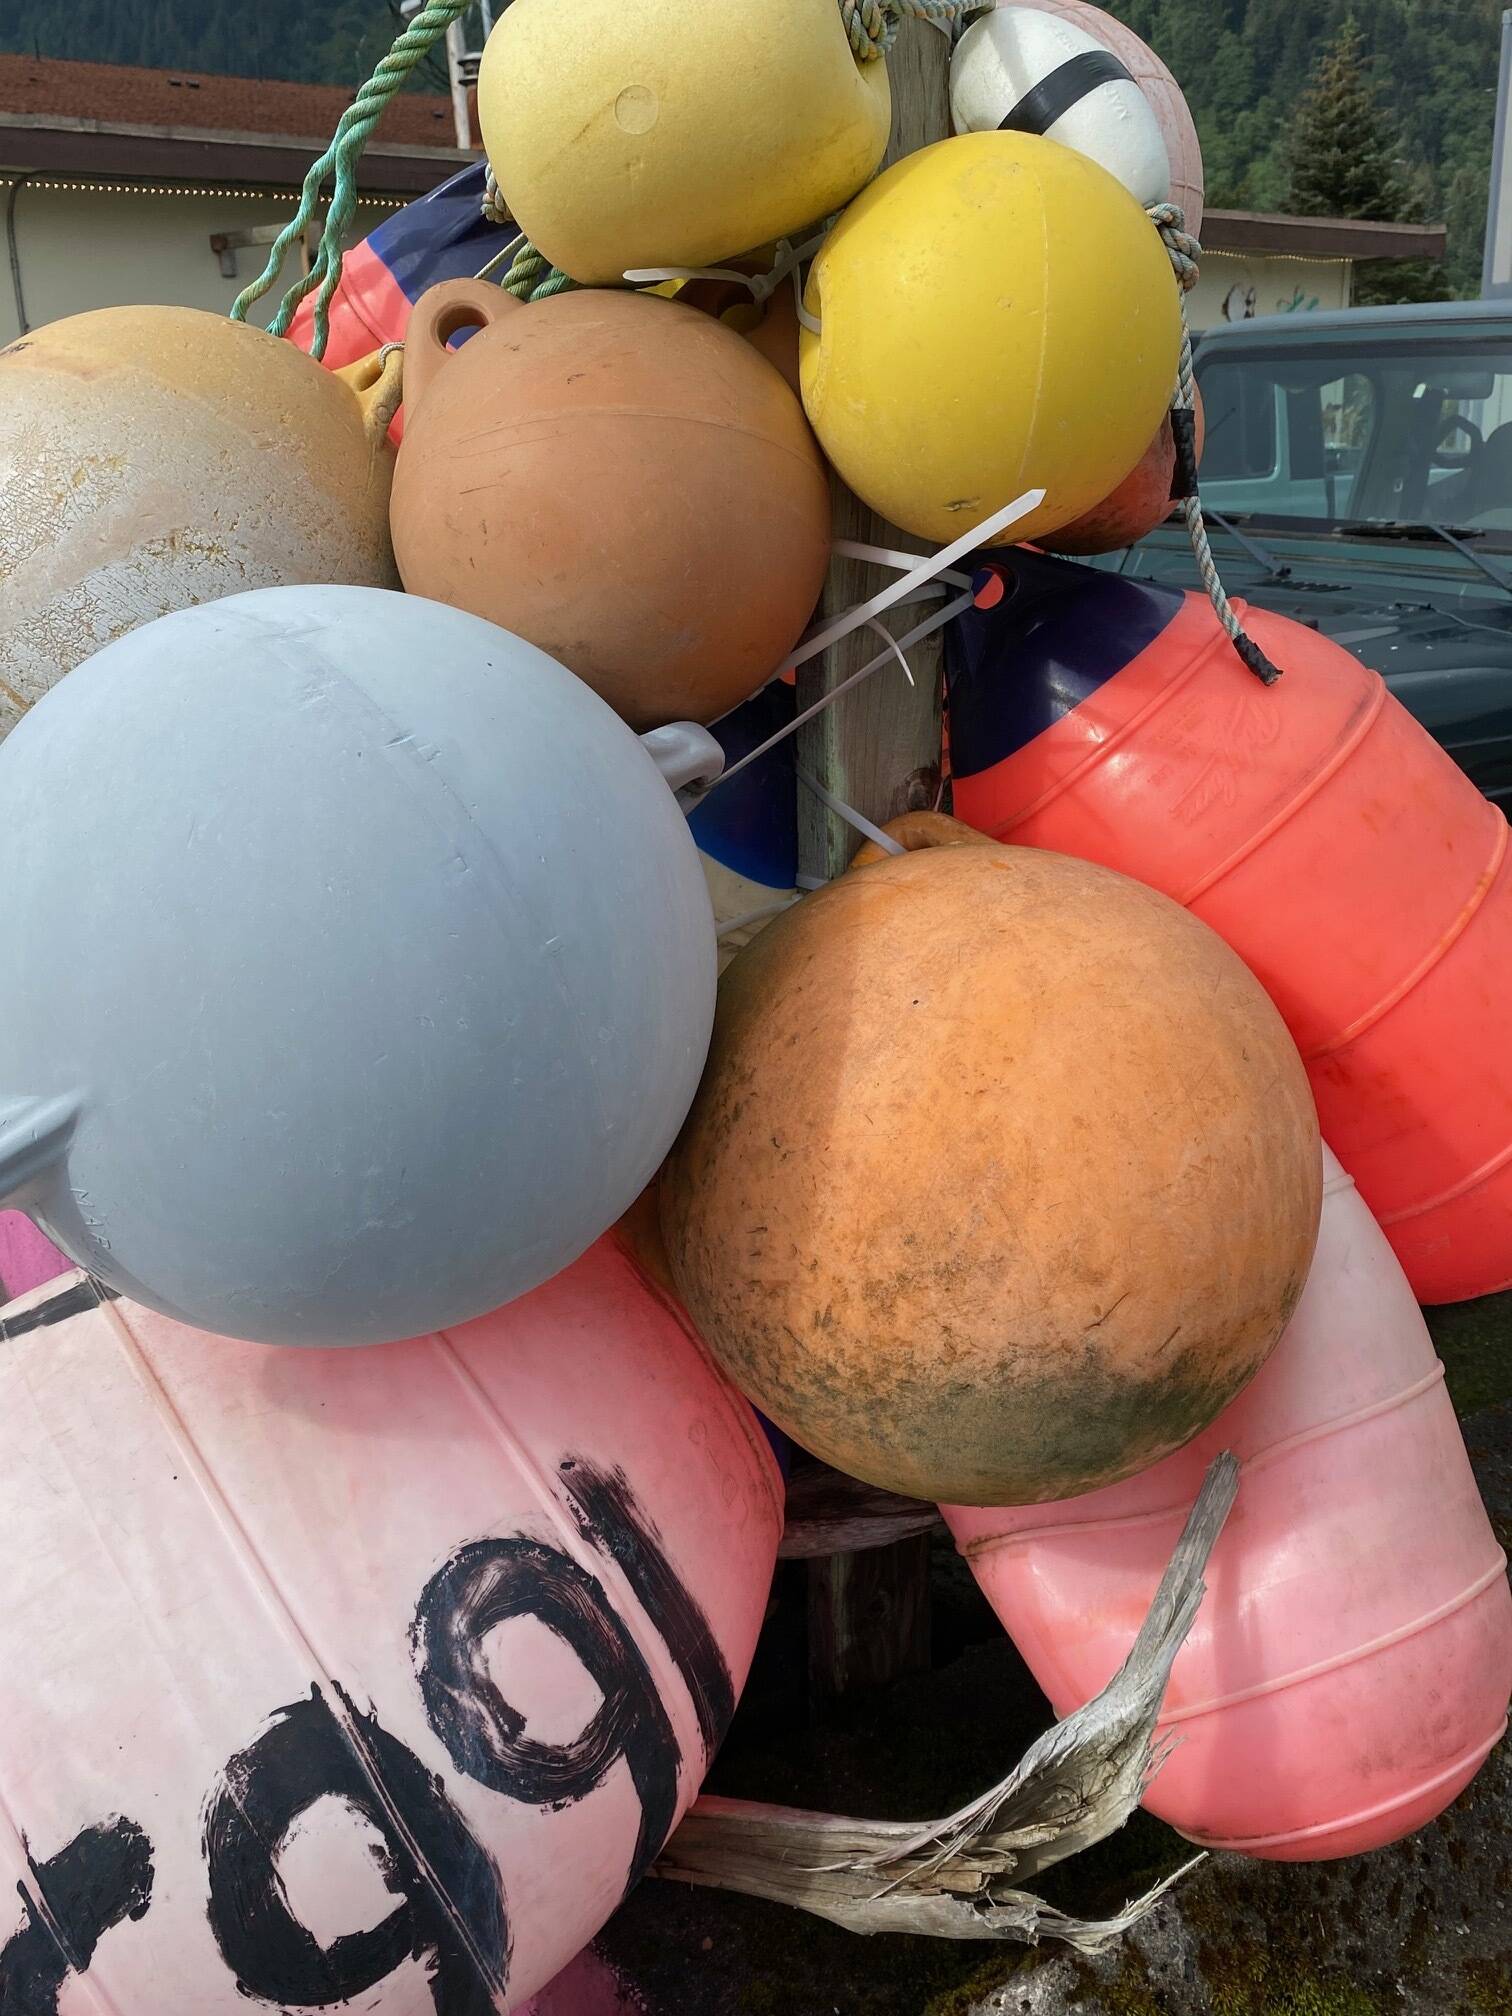 Colorful fishing buoys catch the sunlight near a town parking lot on Aug. 13. (Photo by Denise Carroll)